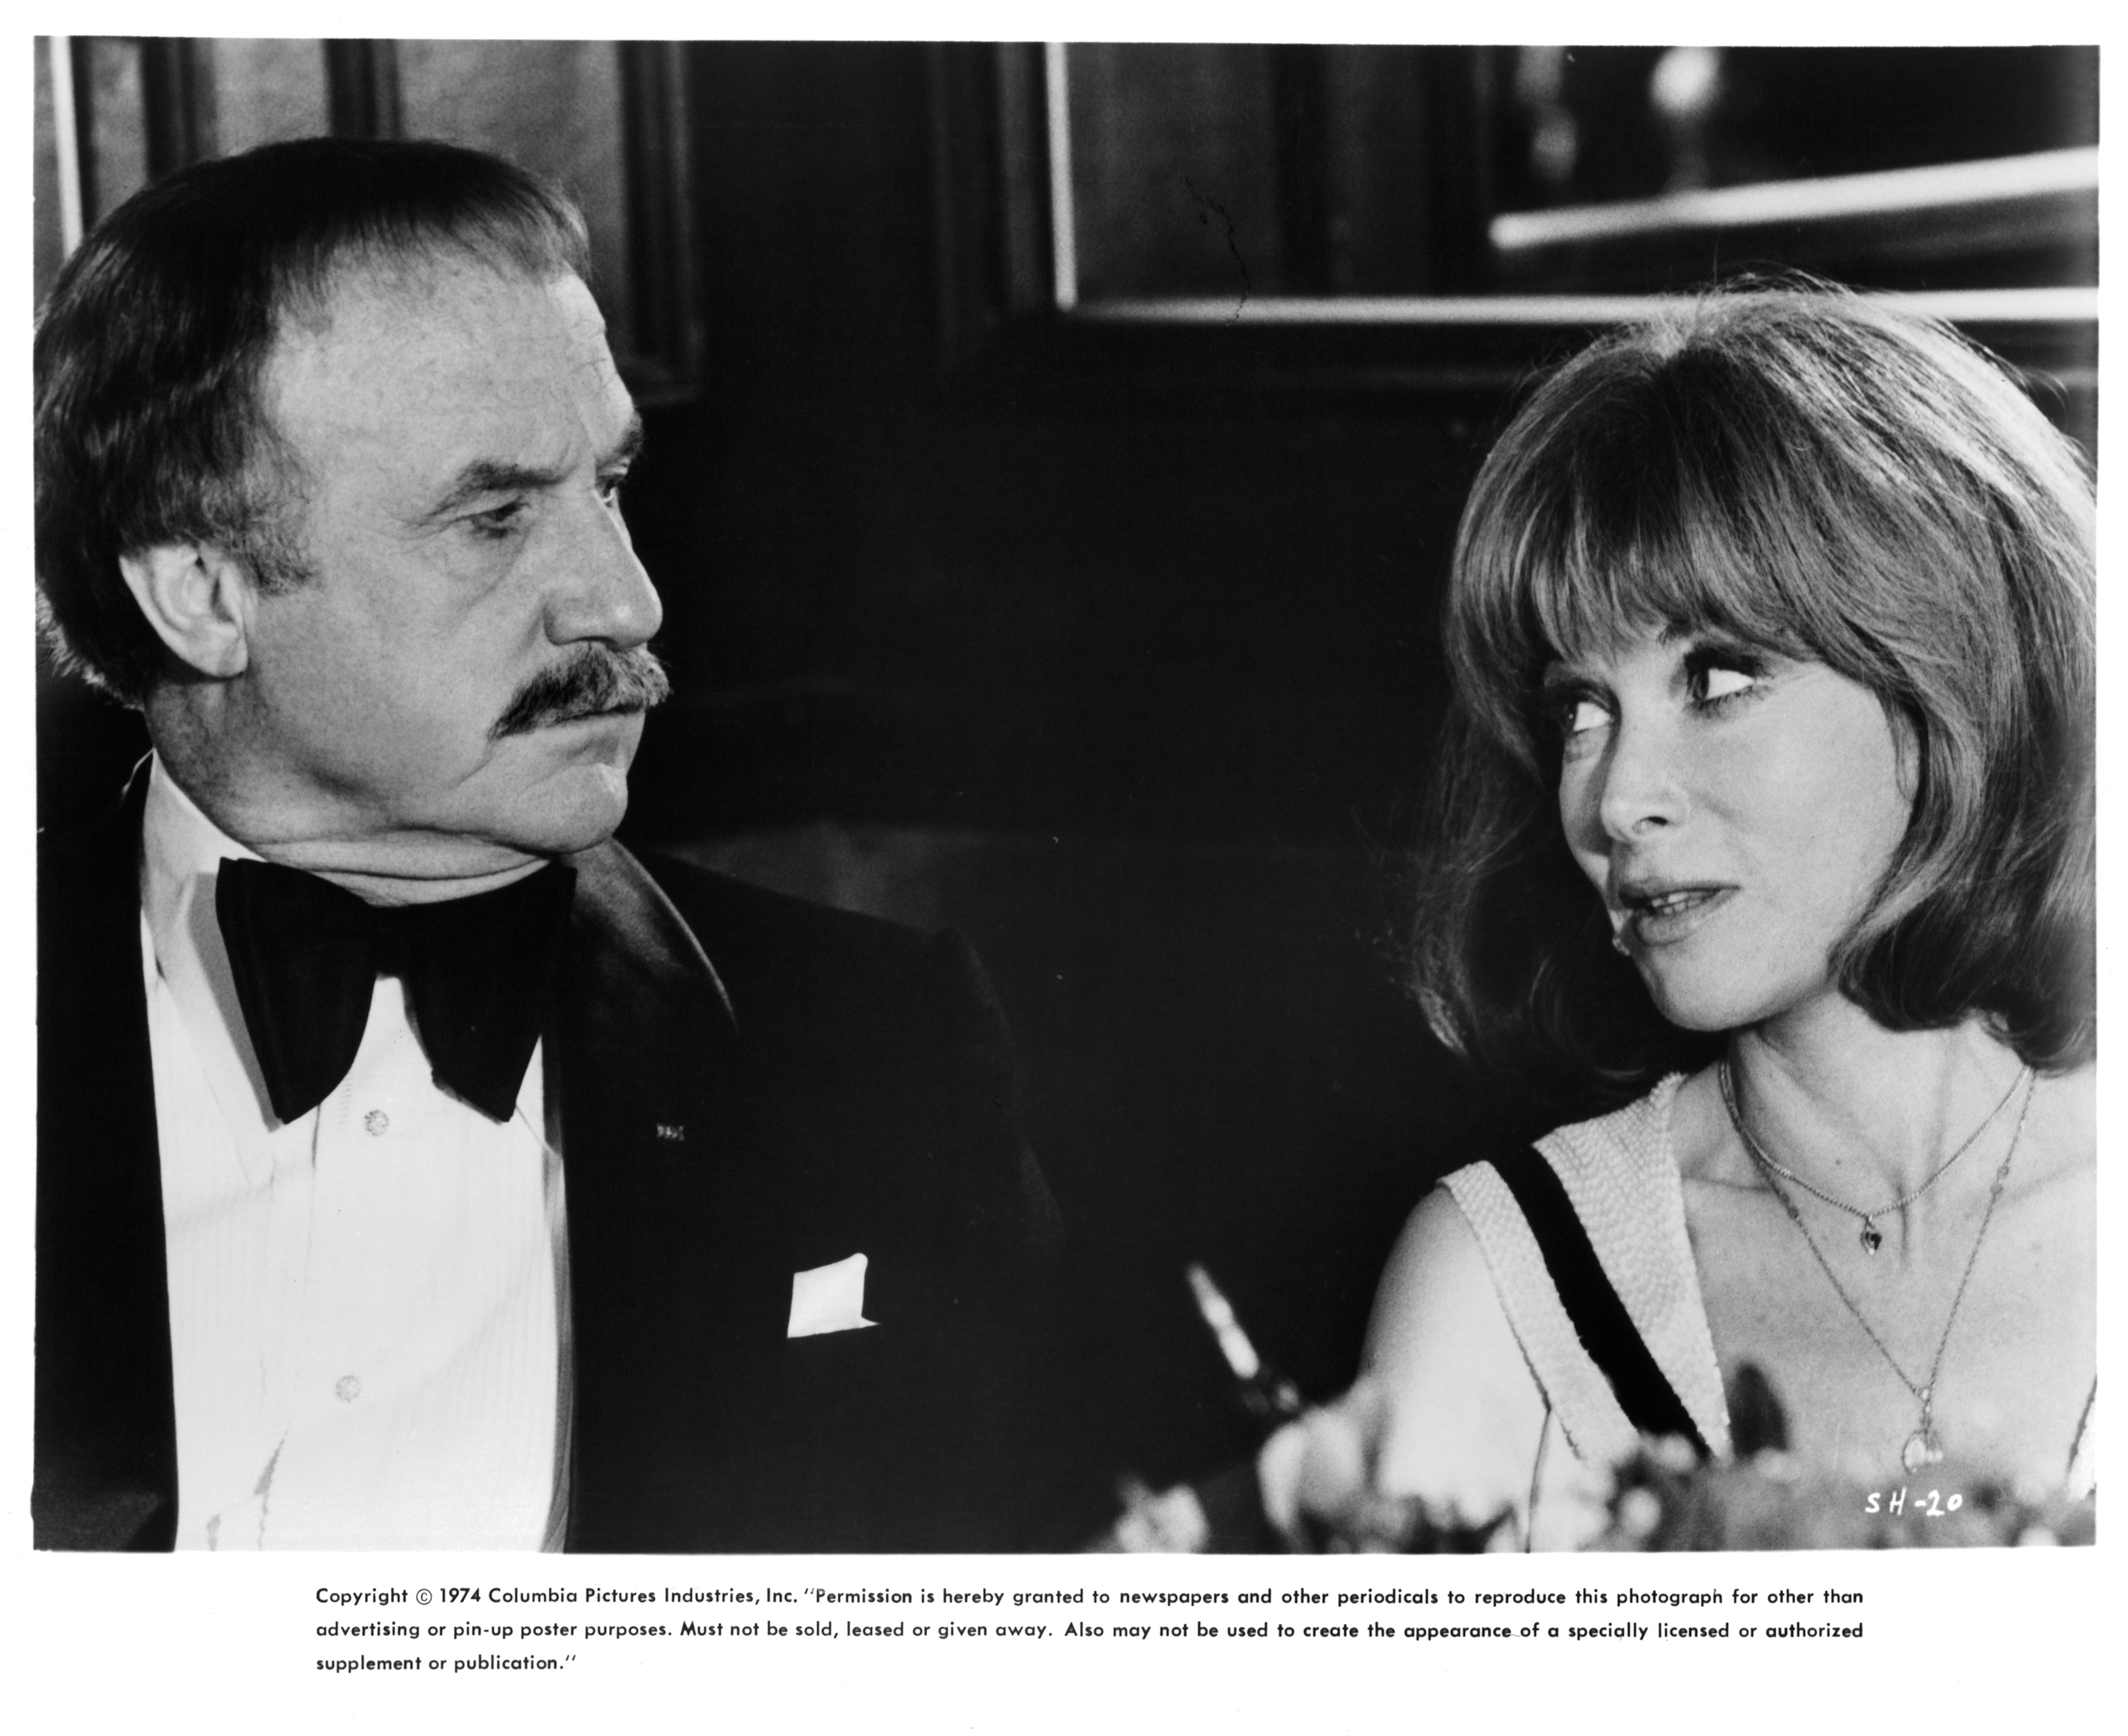 Jack Warden and Lee Grant, circa 1975, in "Shampoo" | Source: Getty Images